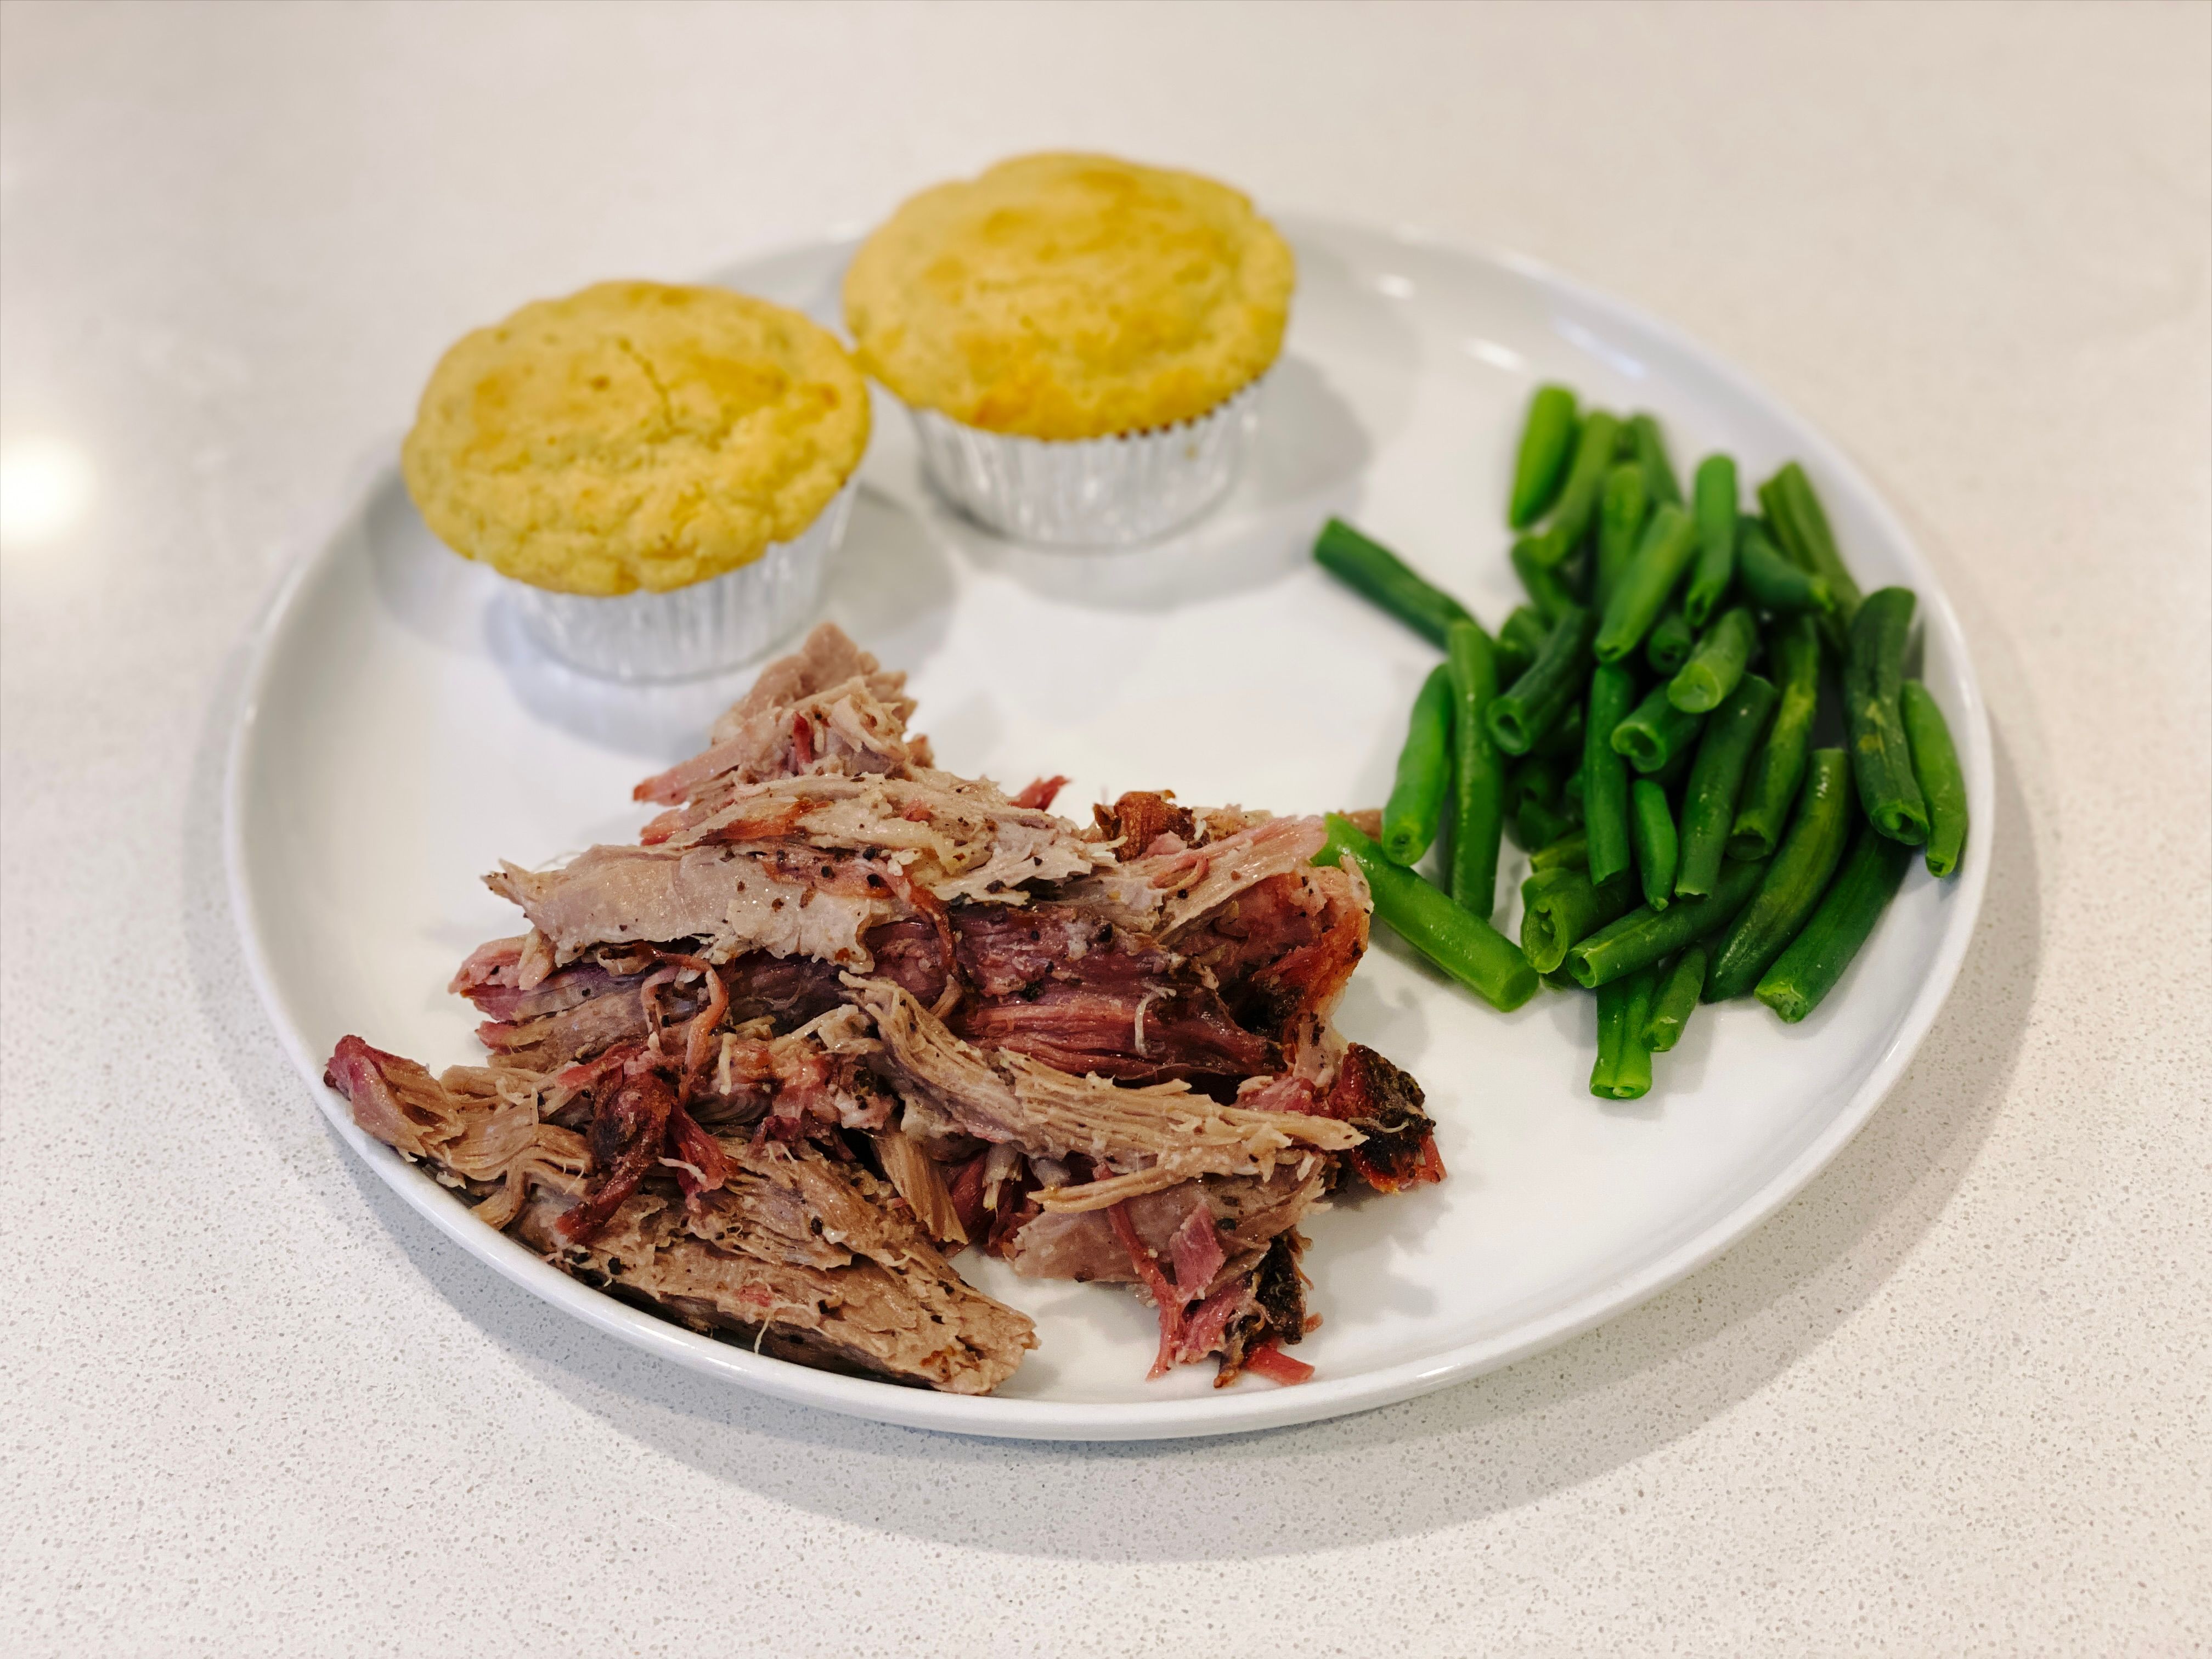 A serving of the pork collar butt on a dinner plate along with some green beans and two corn muffins.